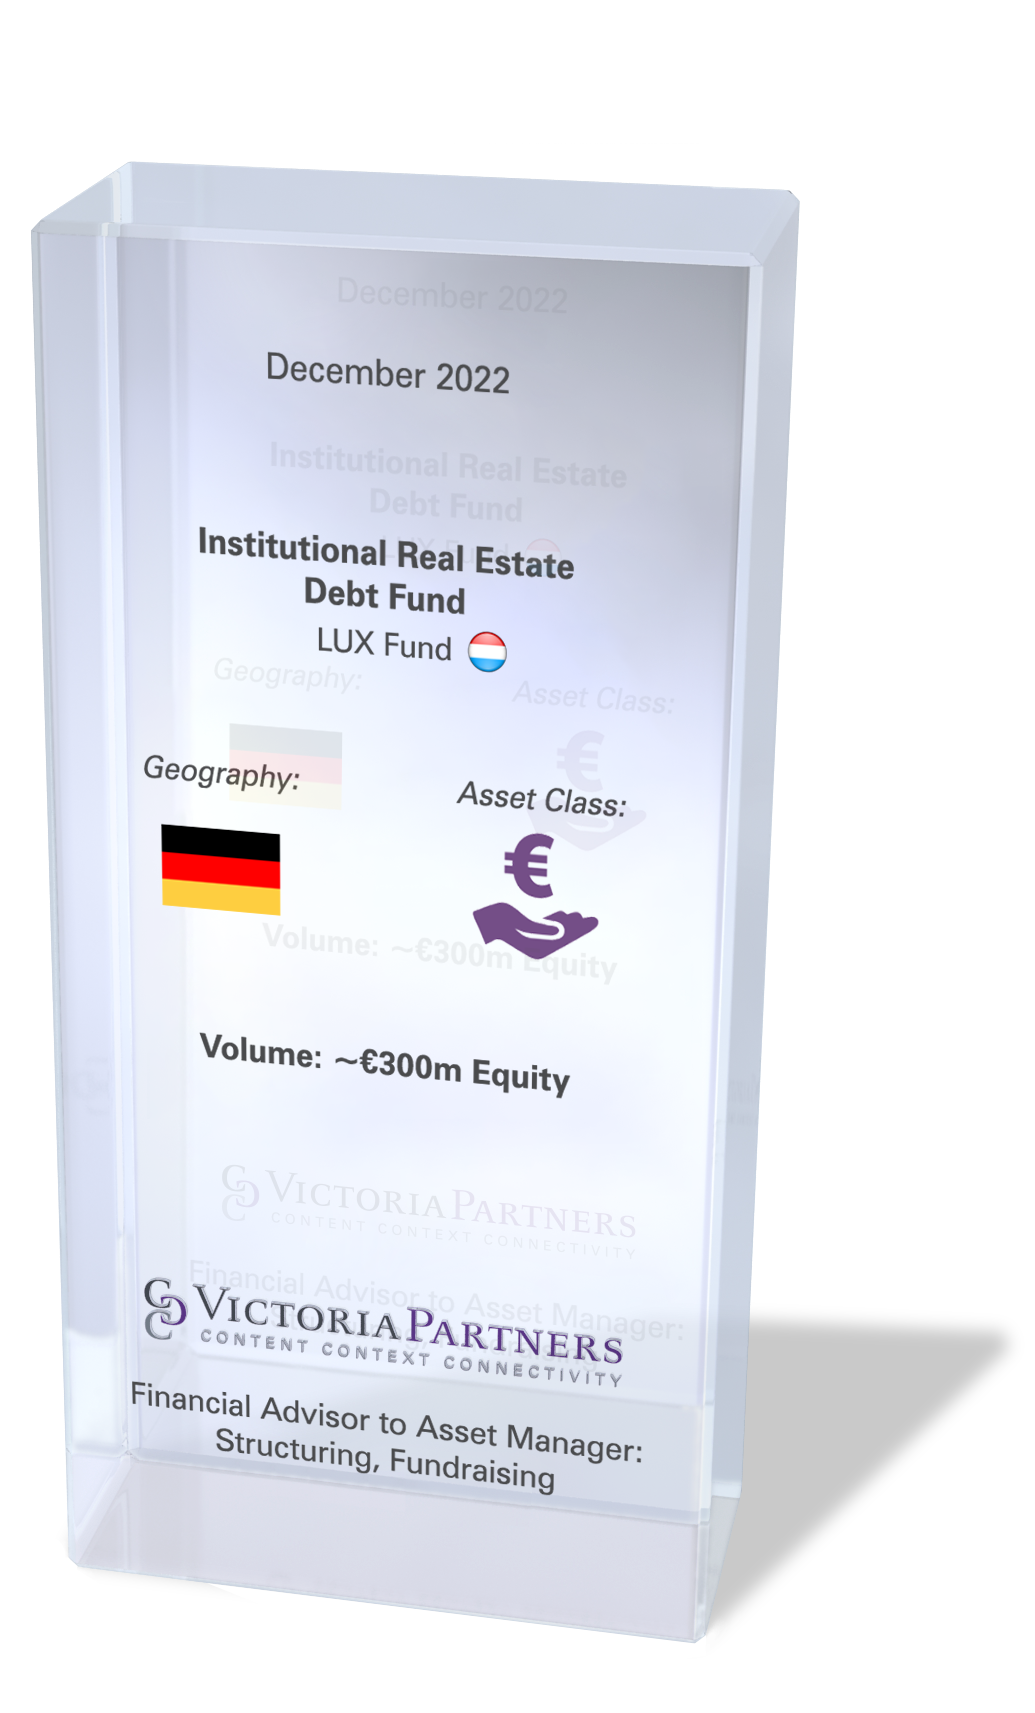 VICTORIAPARTNERS - Financial Advisor to Asset Manager: Structuring, Fundraising in Deutschland- December 2022